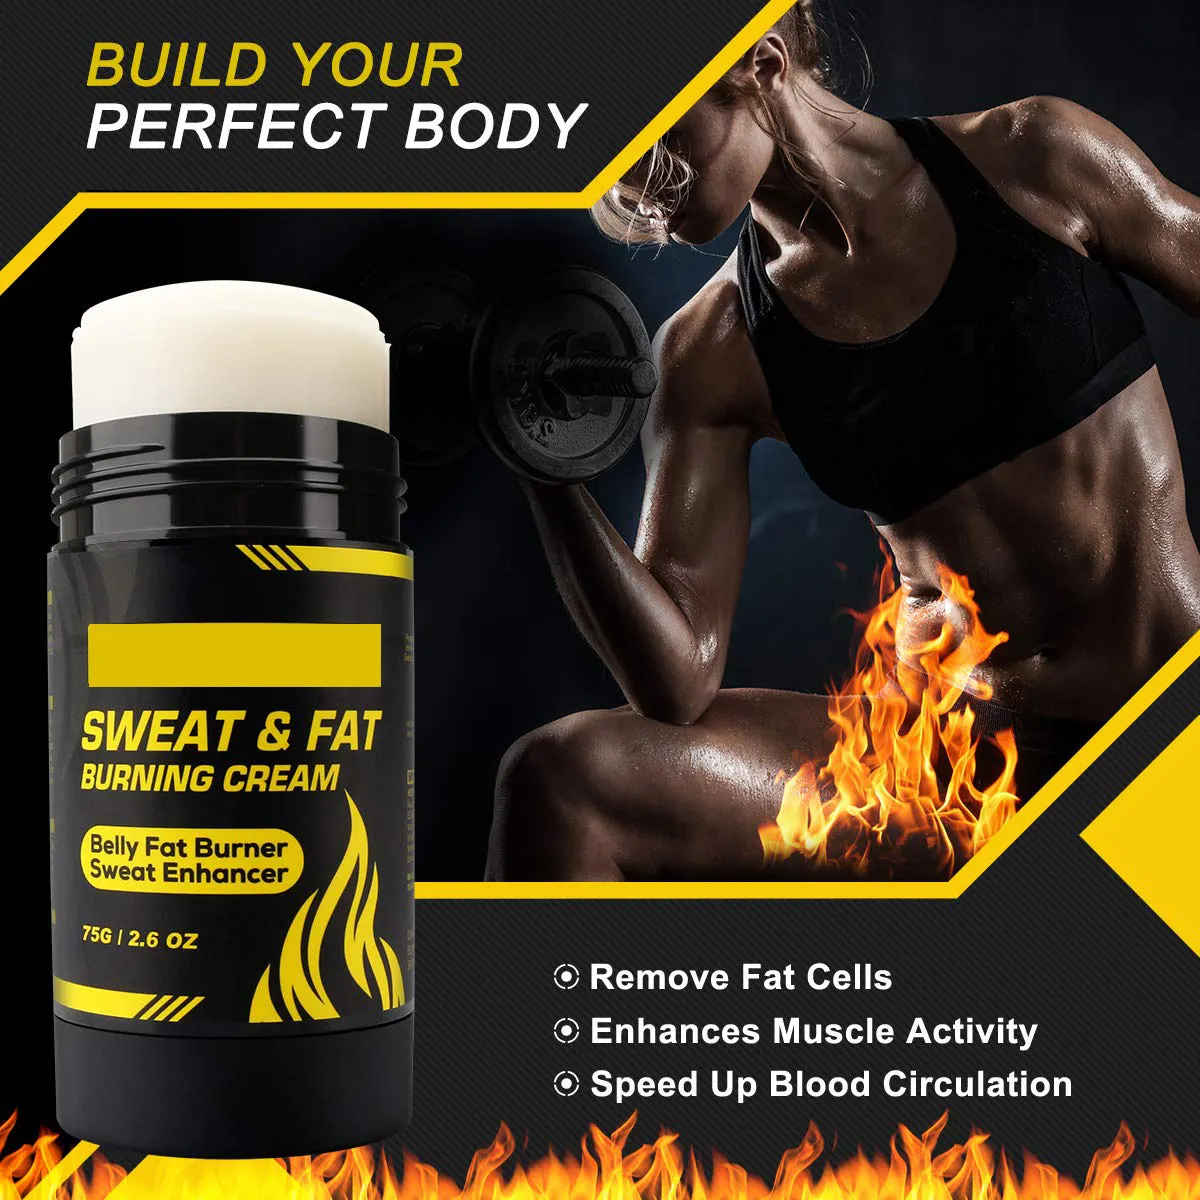 Private Label Hot Sweat Gel Weight Loss Workout Enhancer Anti Cellulite Firming Cream Best Fat Burning Slimming Cream